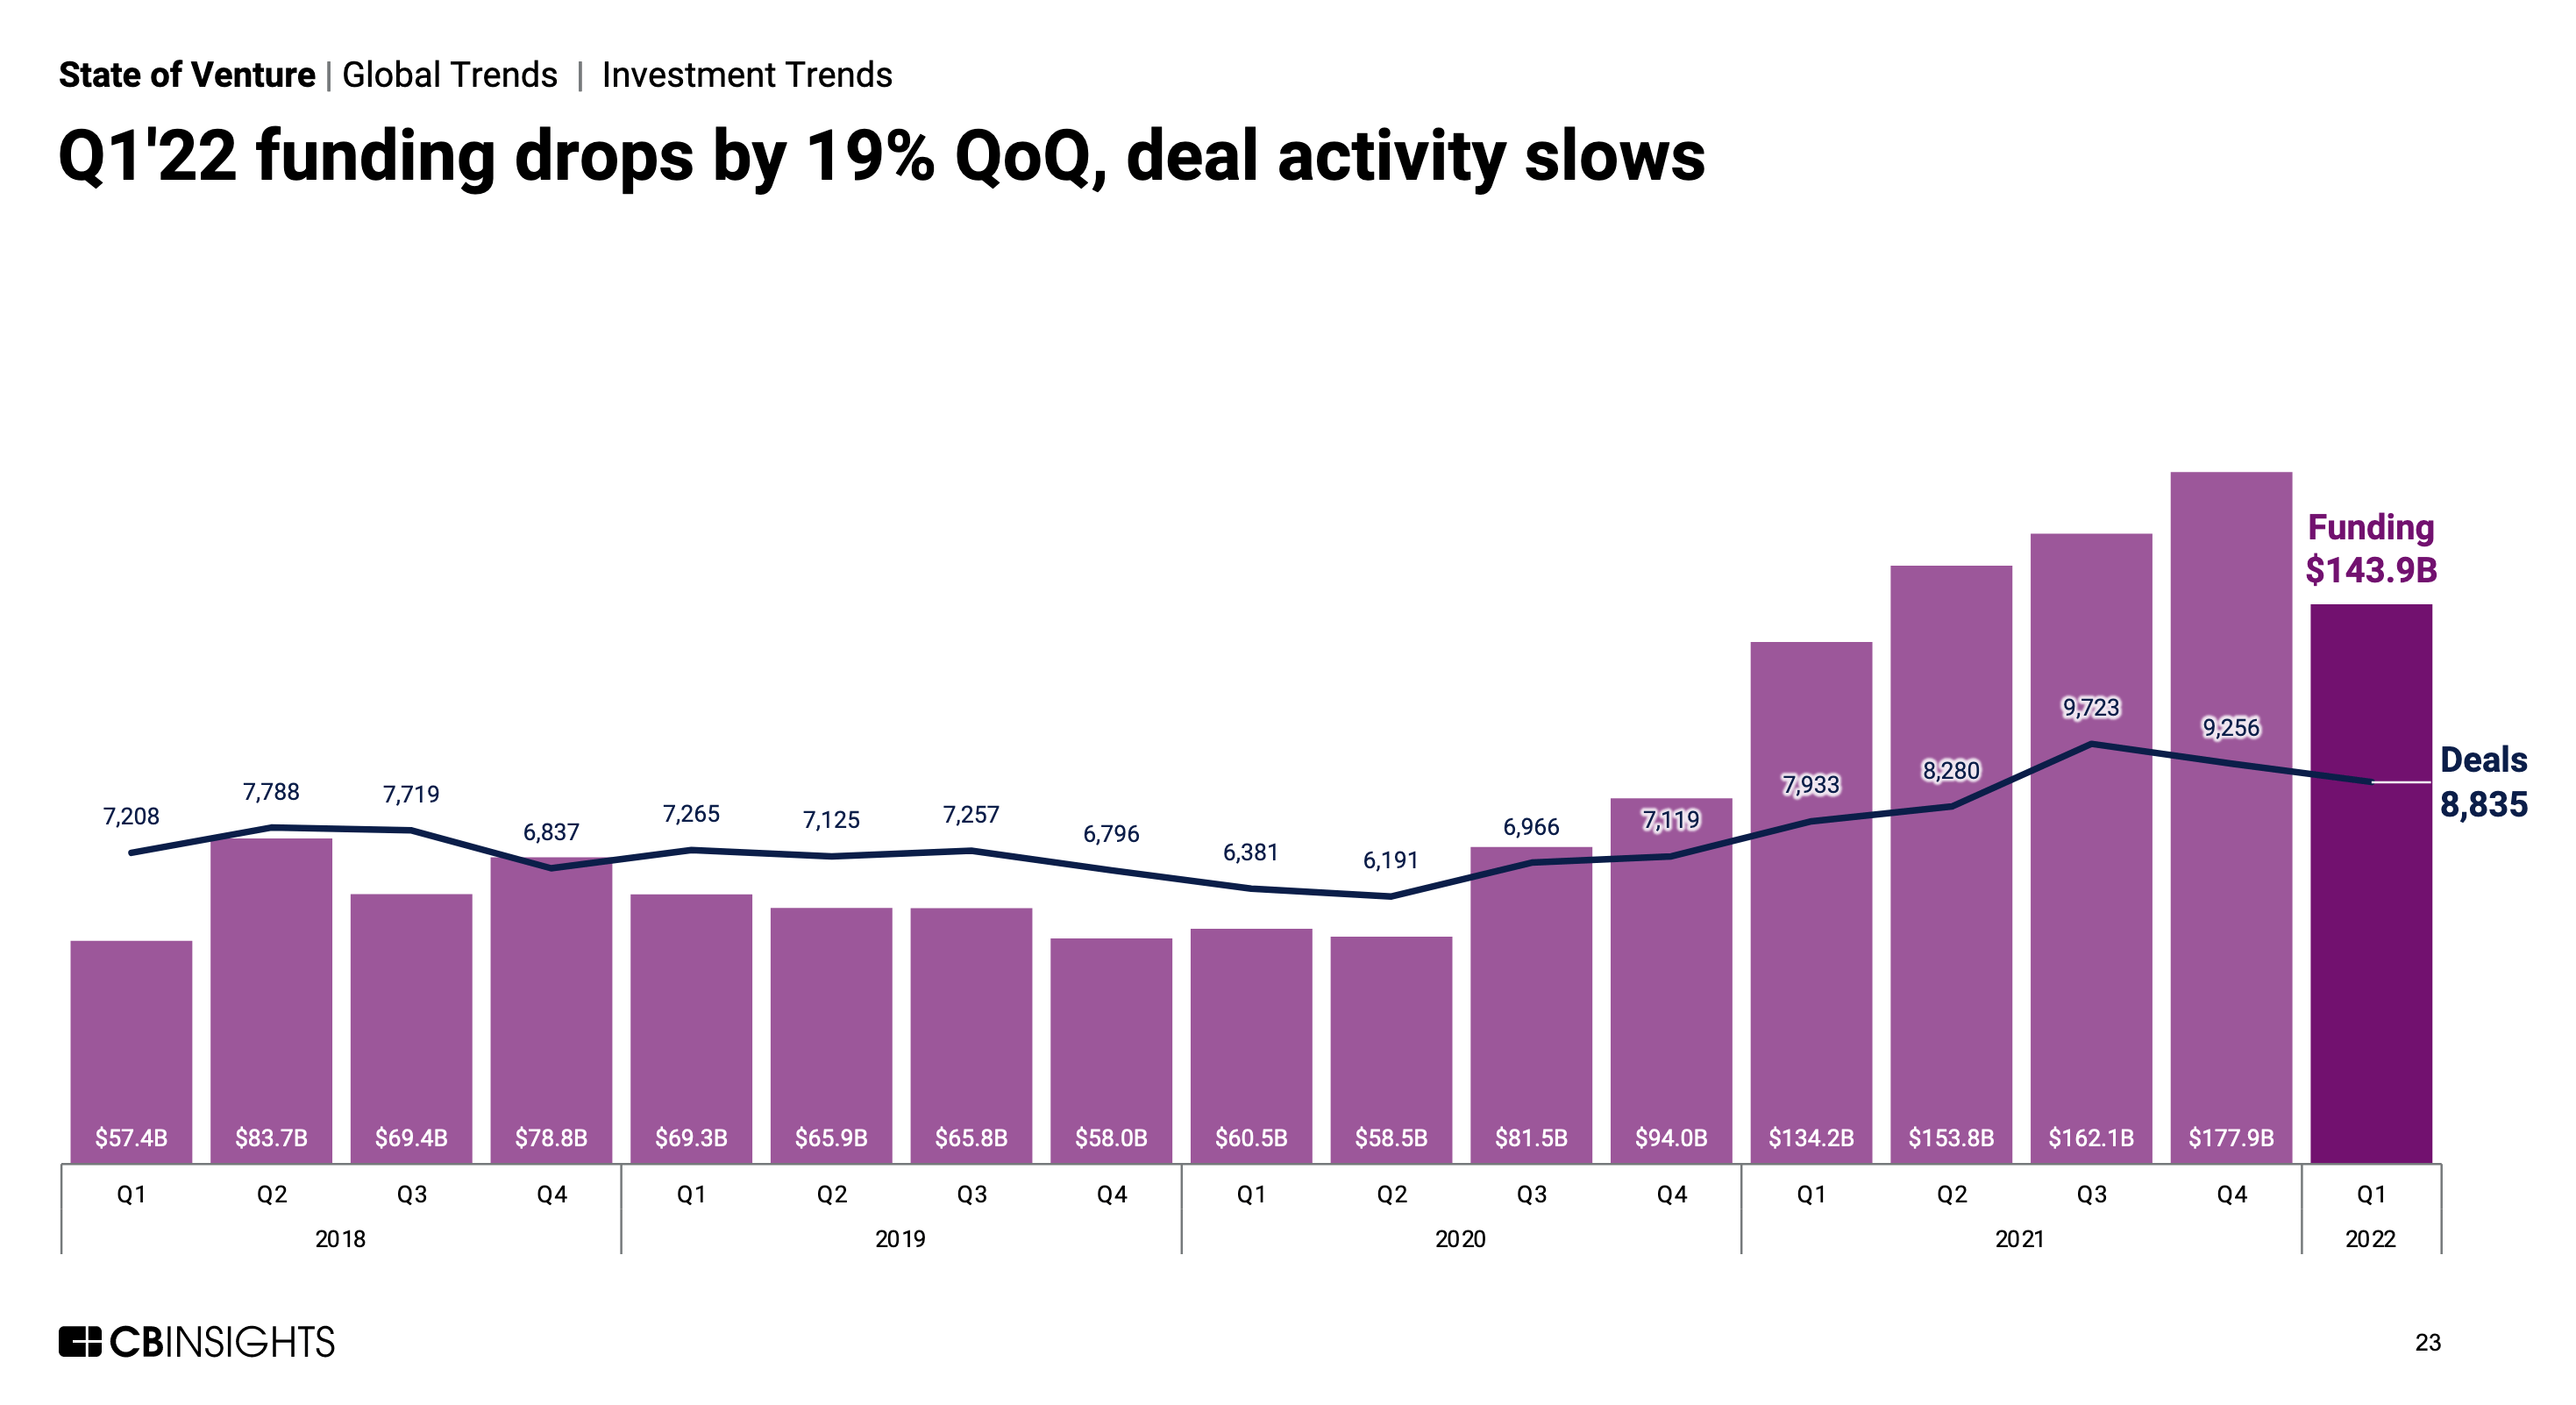 Analysis of VC Investment Activity in the US by YoY Growth According to Chapman & Bloomberg: